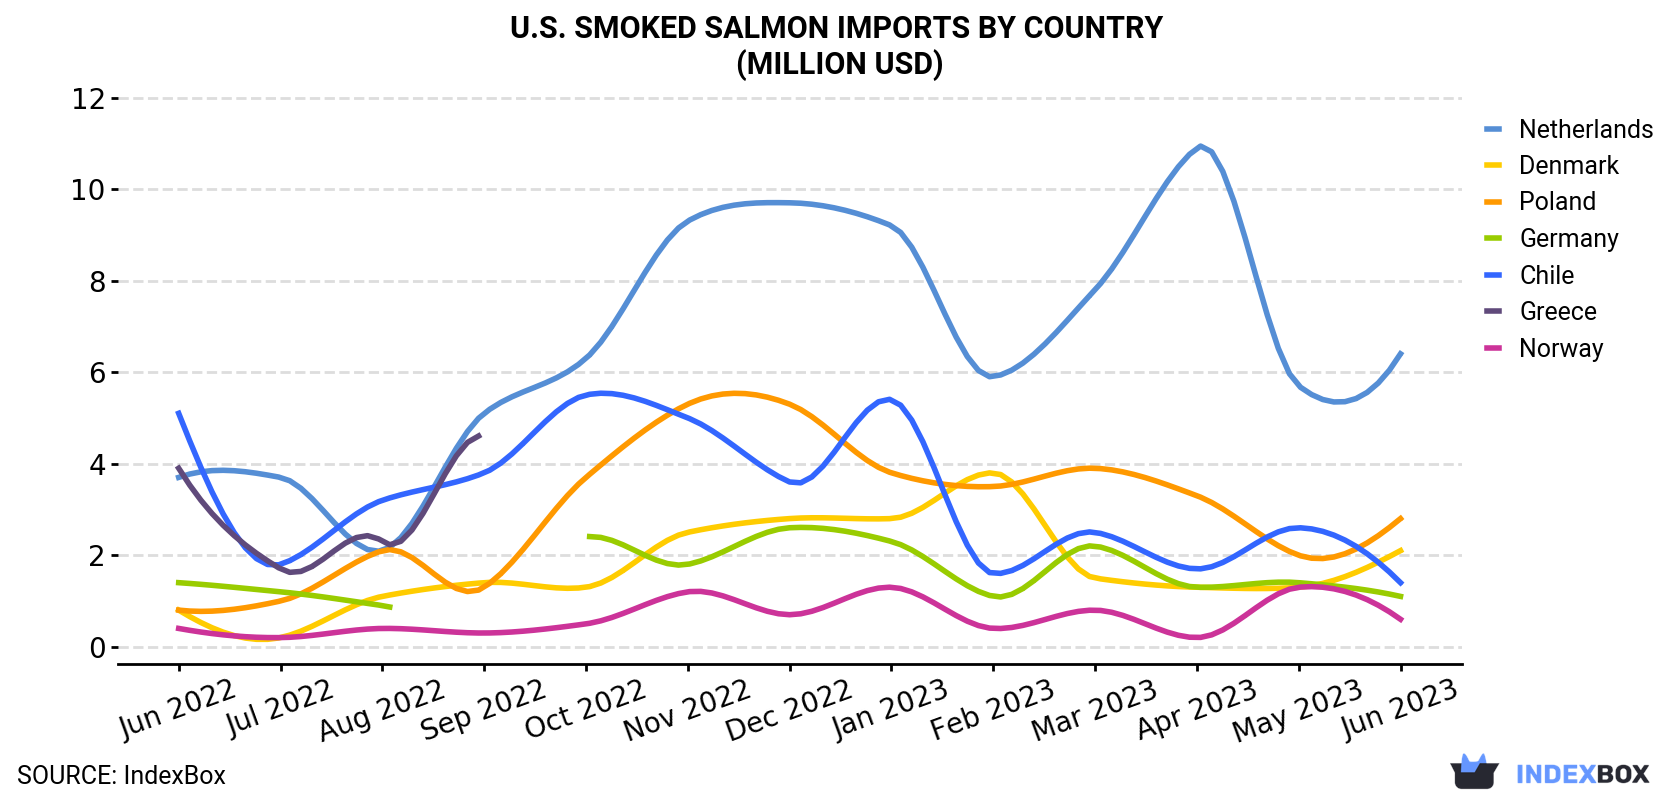 U.S. Smoked Salmon Imports By Country (Million USD)